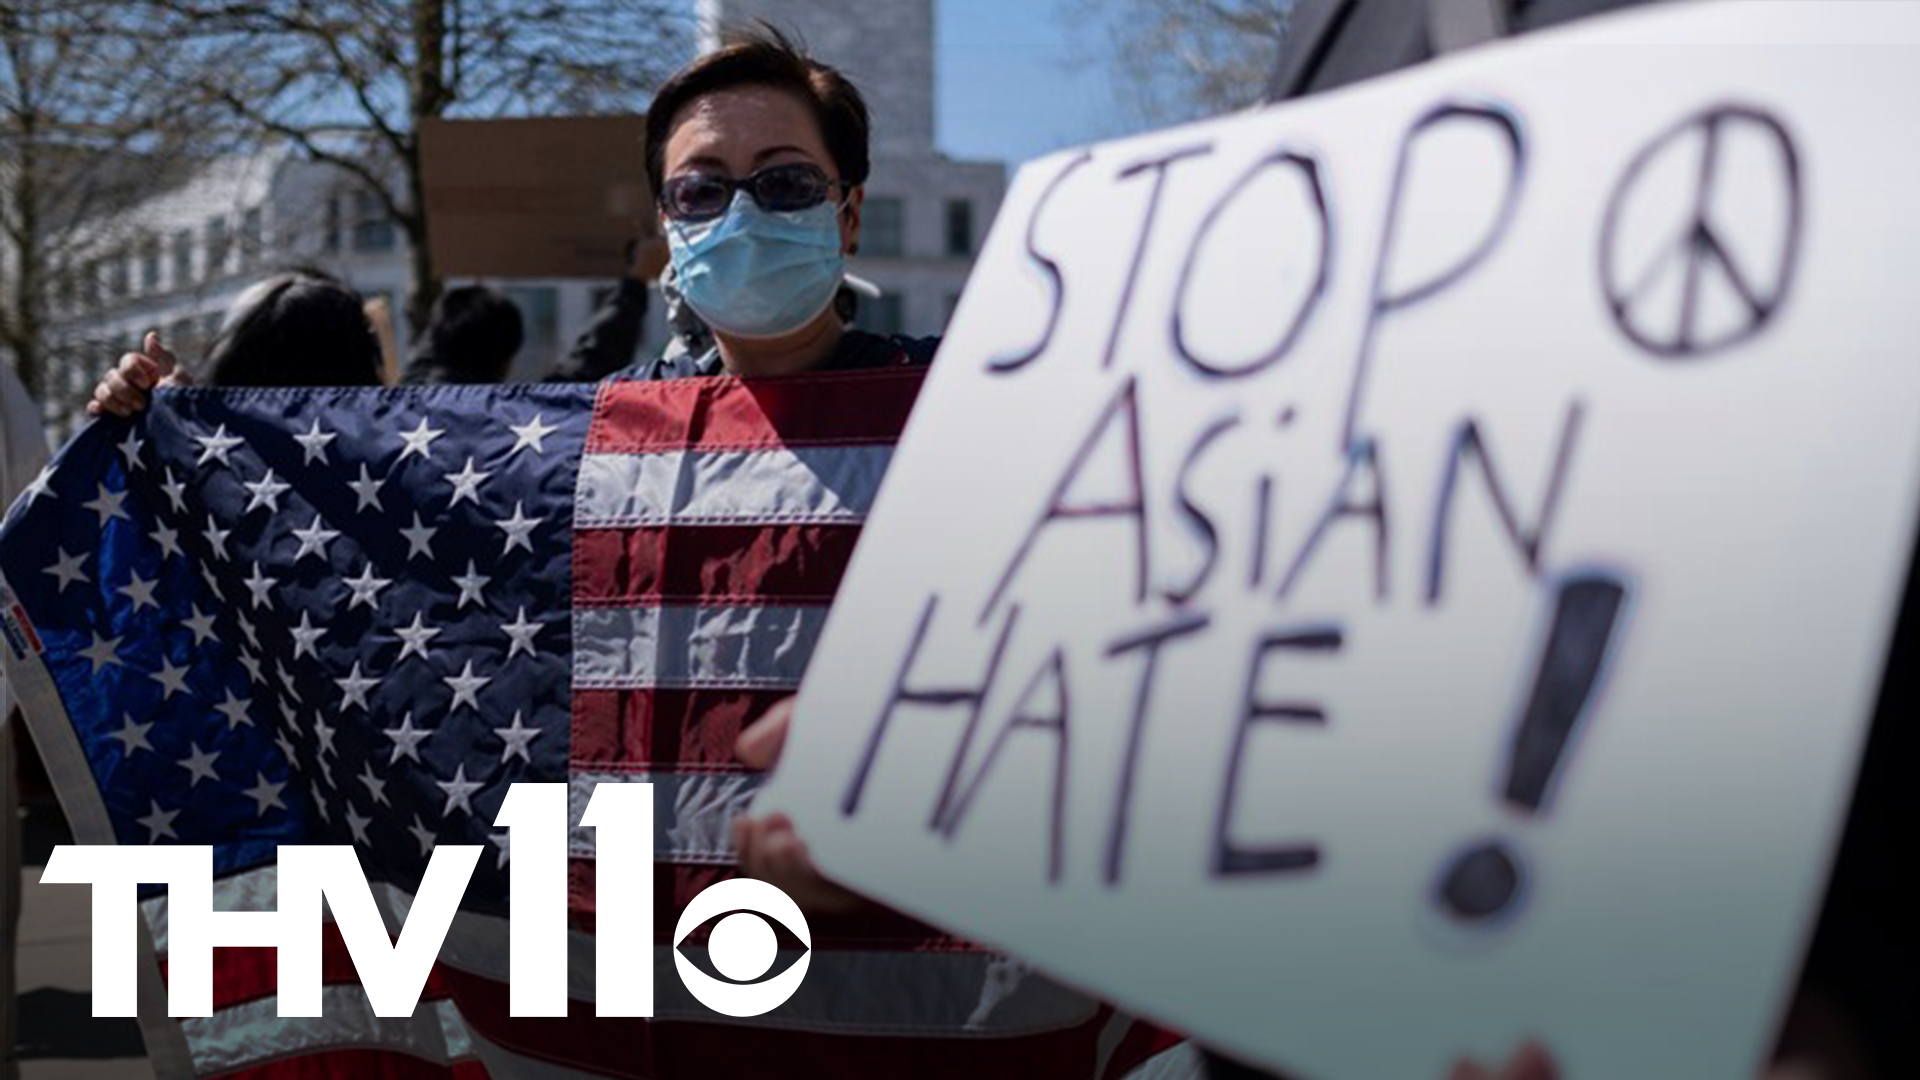 Friday was dedicated as “Stop Asian Hate” after violence escalated against Asian Americans in the past year.